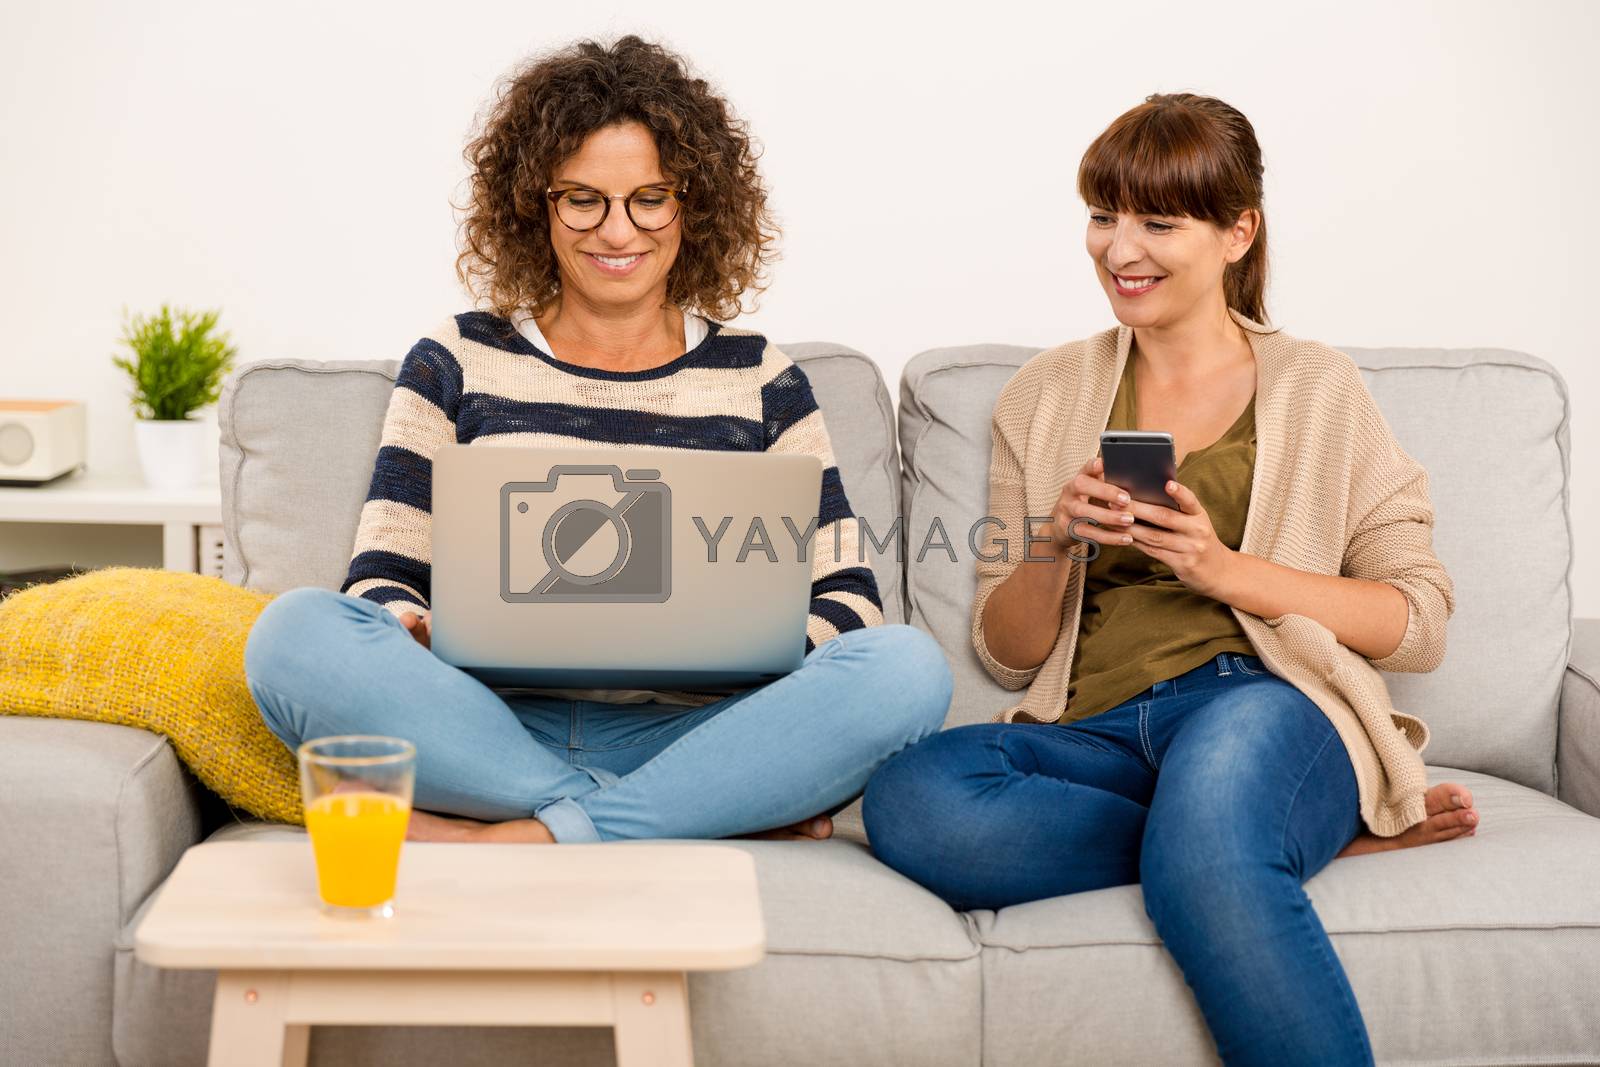 Royalty free image of Best friends working at home by Iko